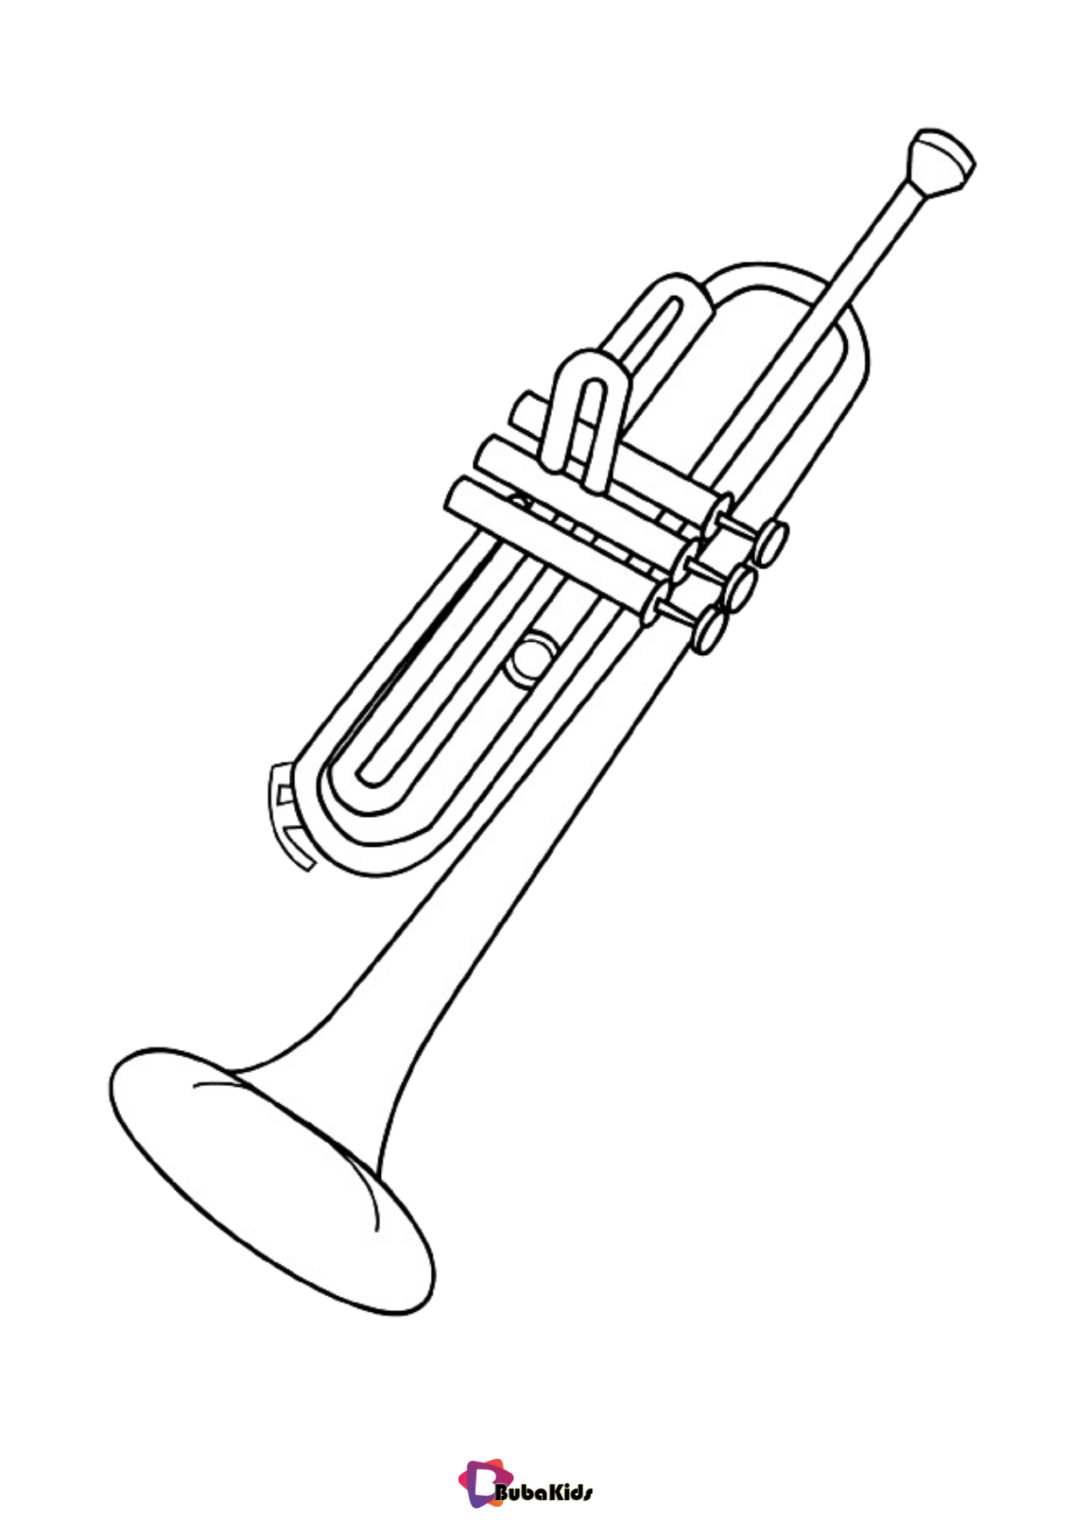 Musical instrument Trumpet coloring pages | BubaKids.com